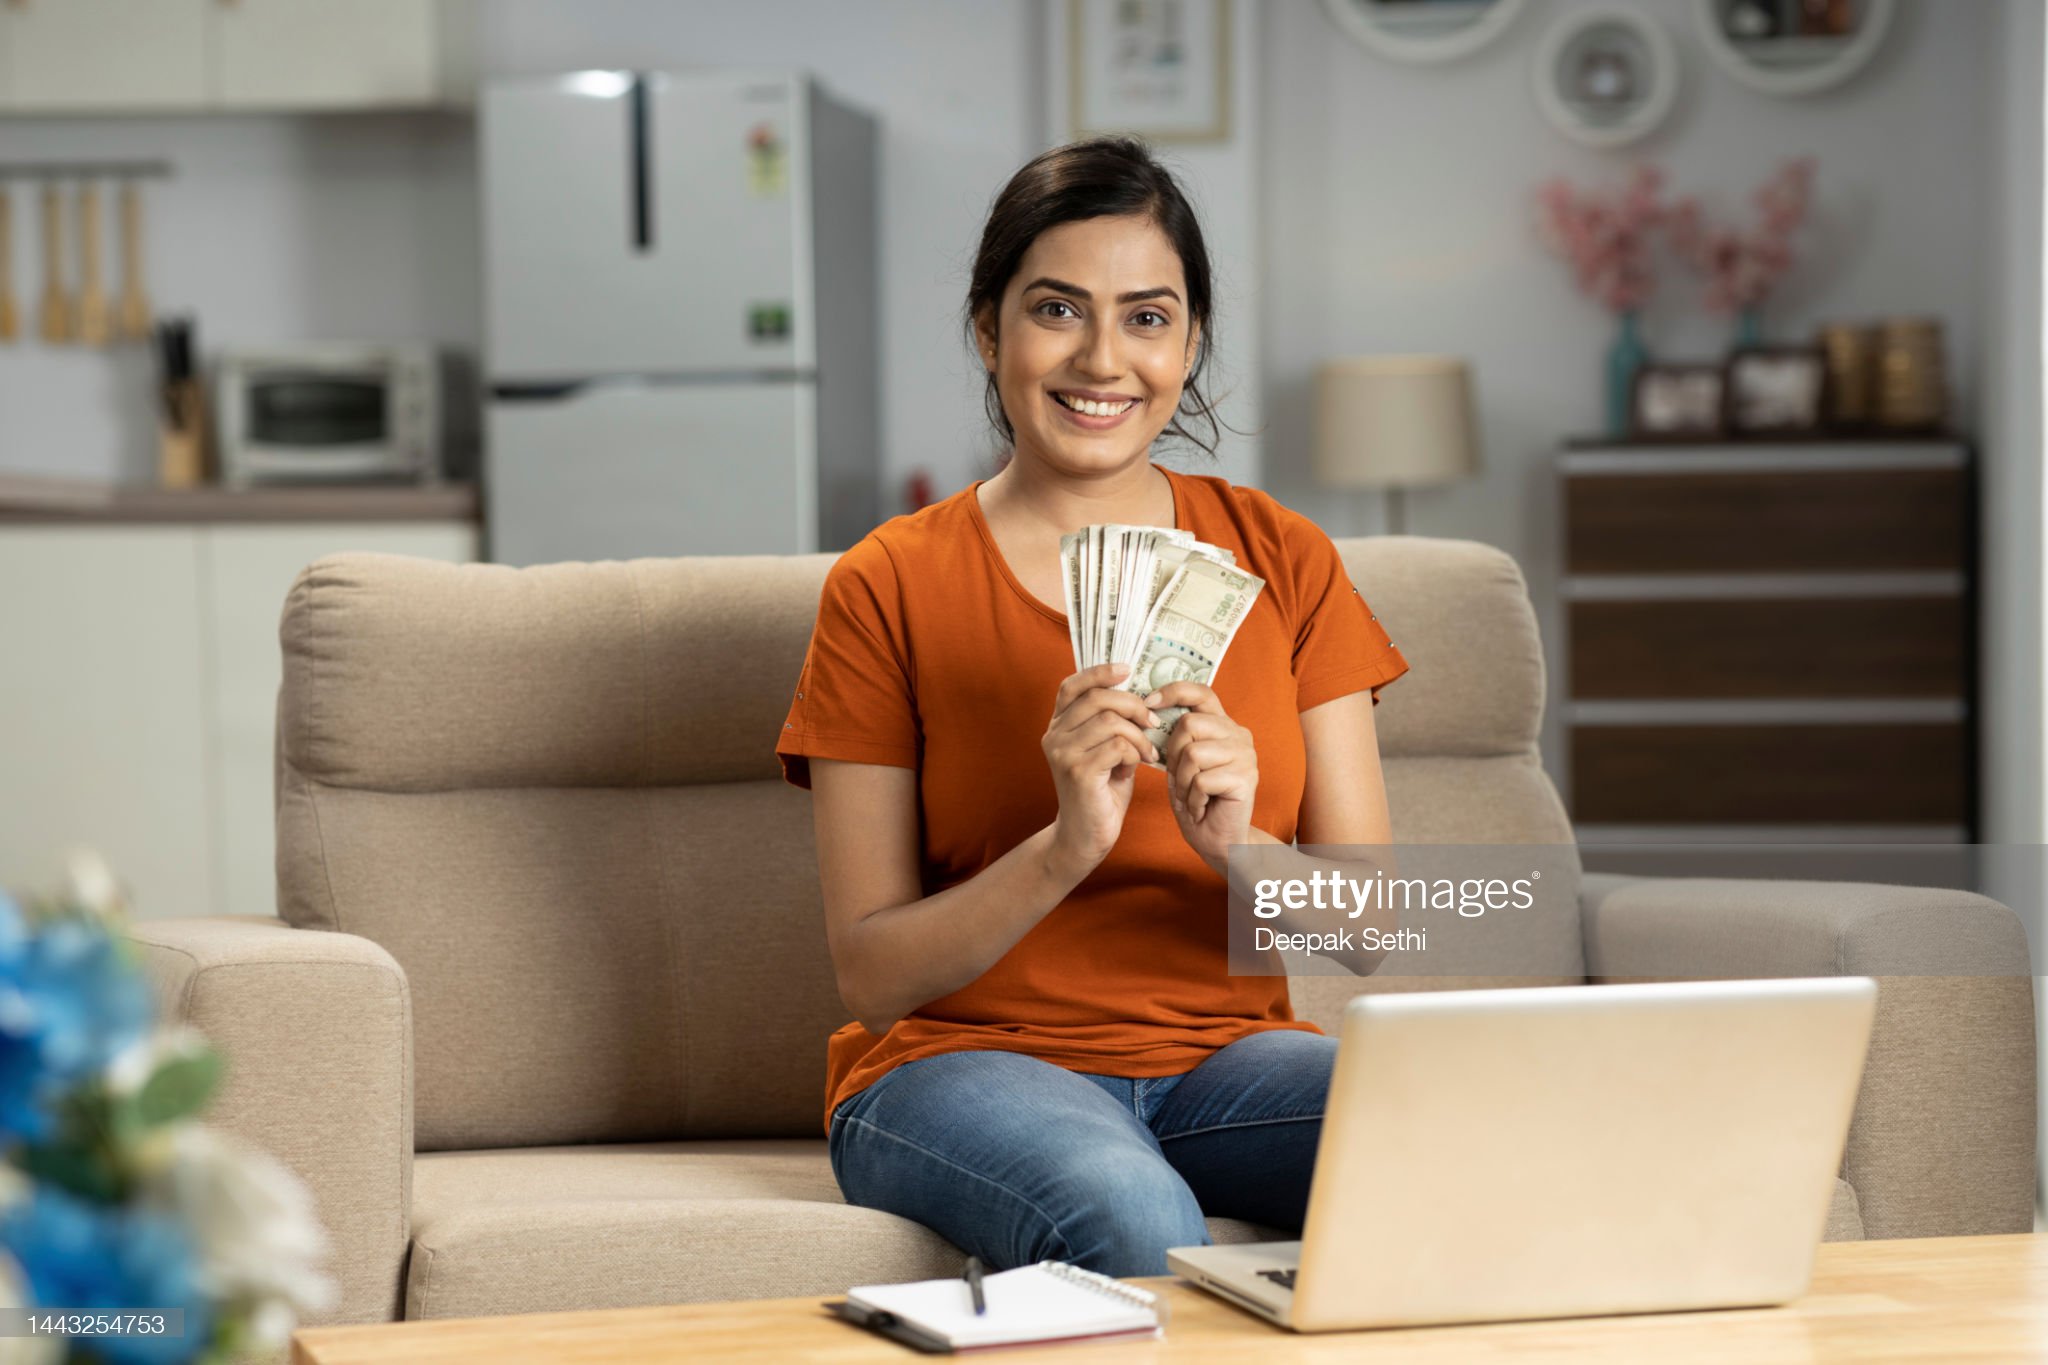 work from home jobs ideas in india